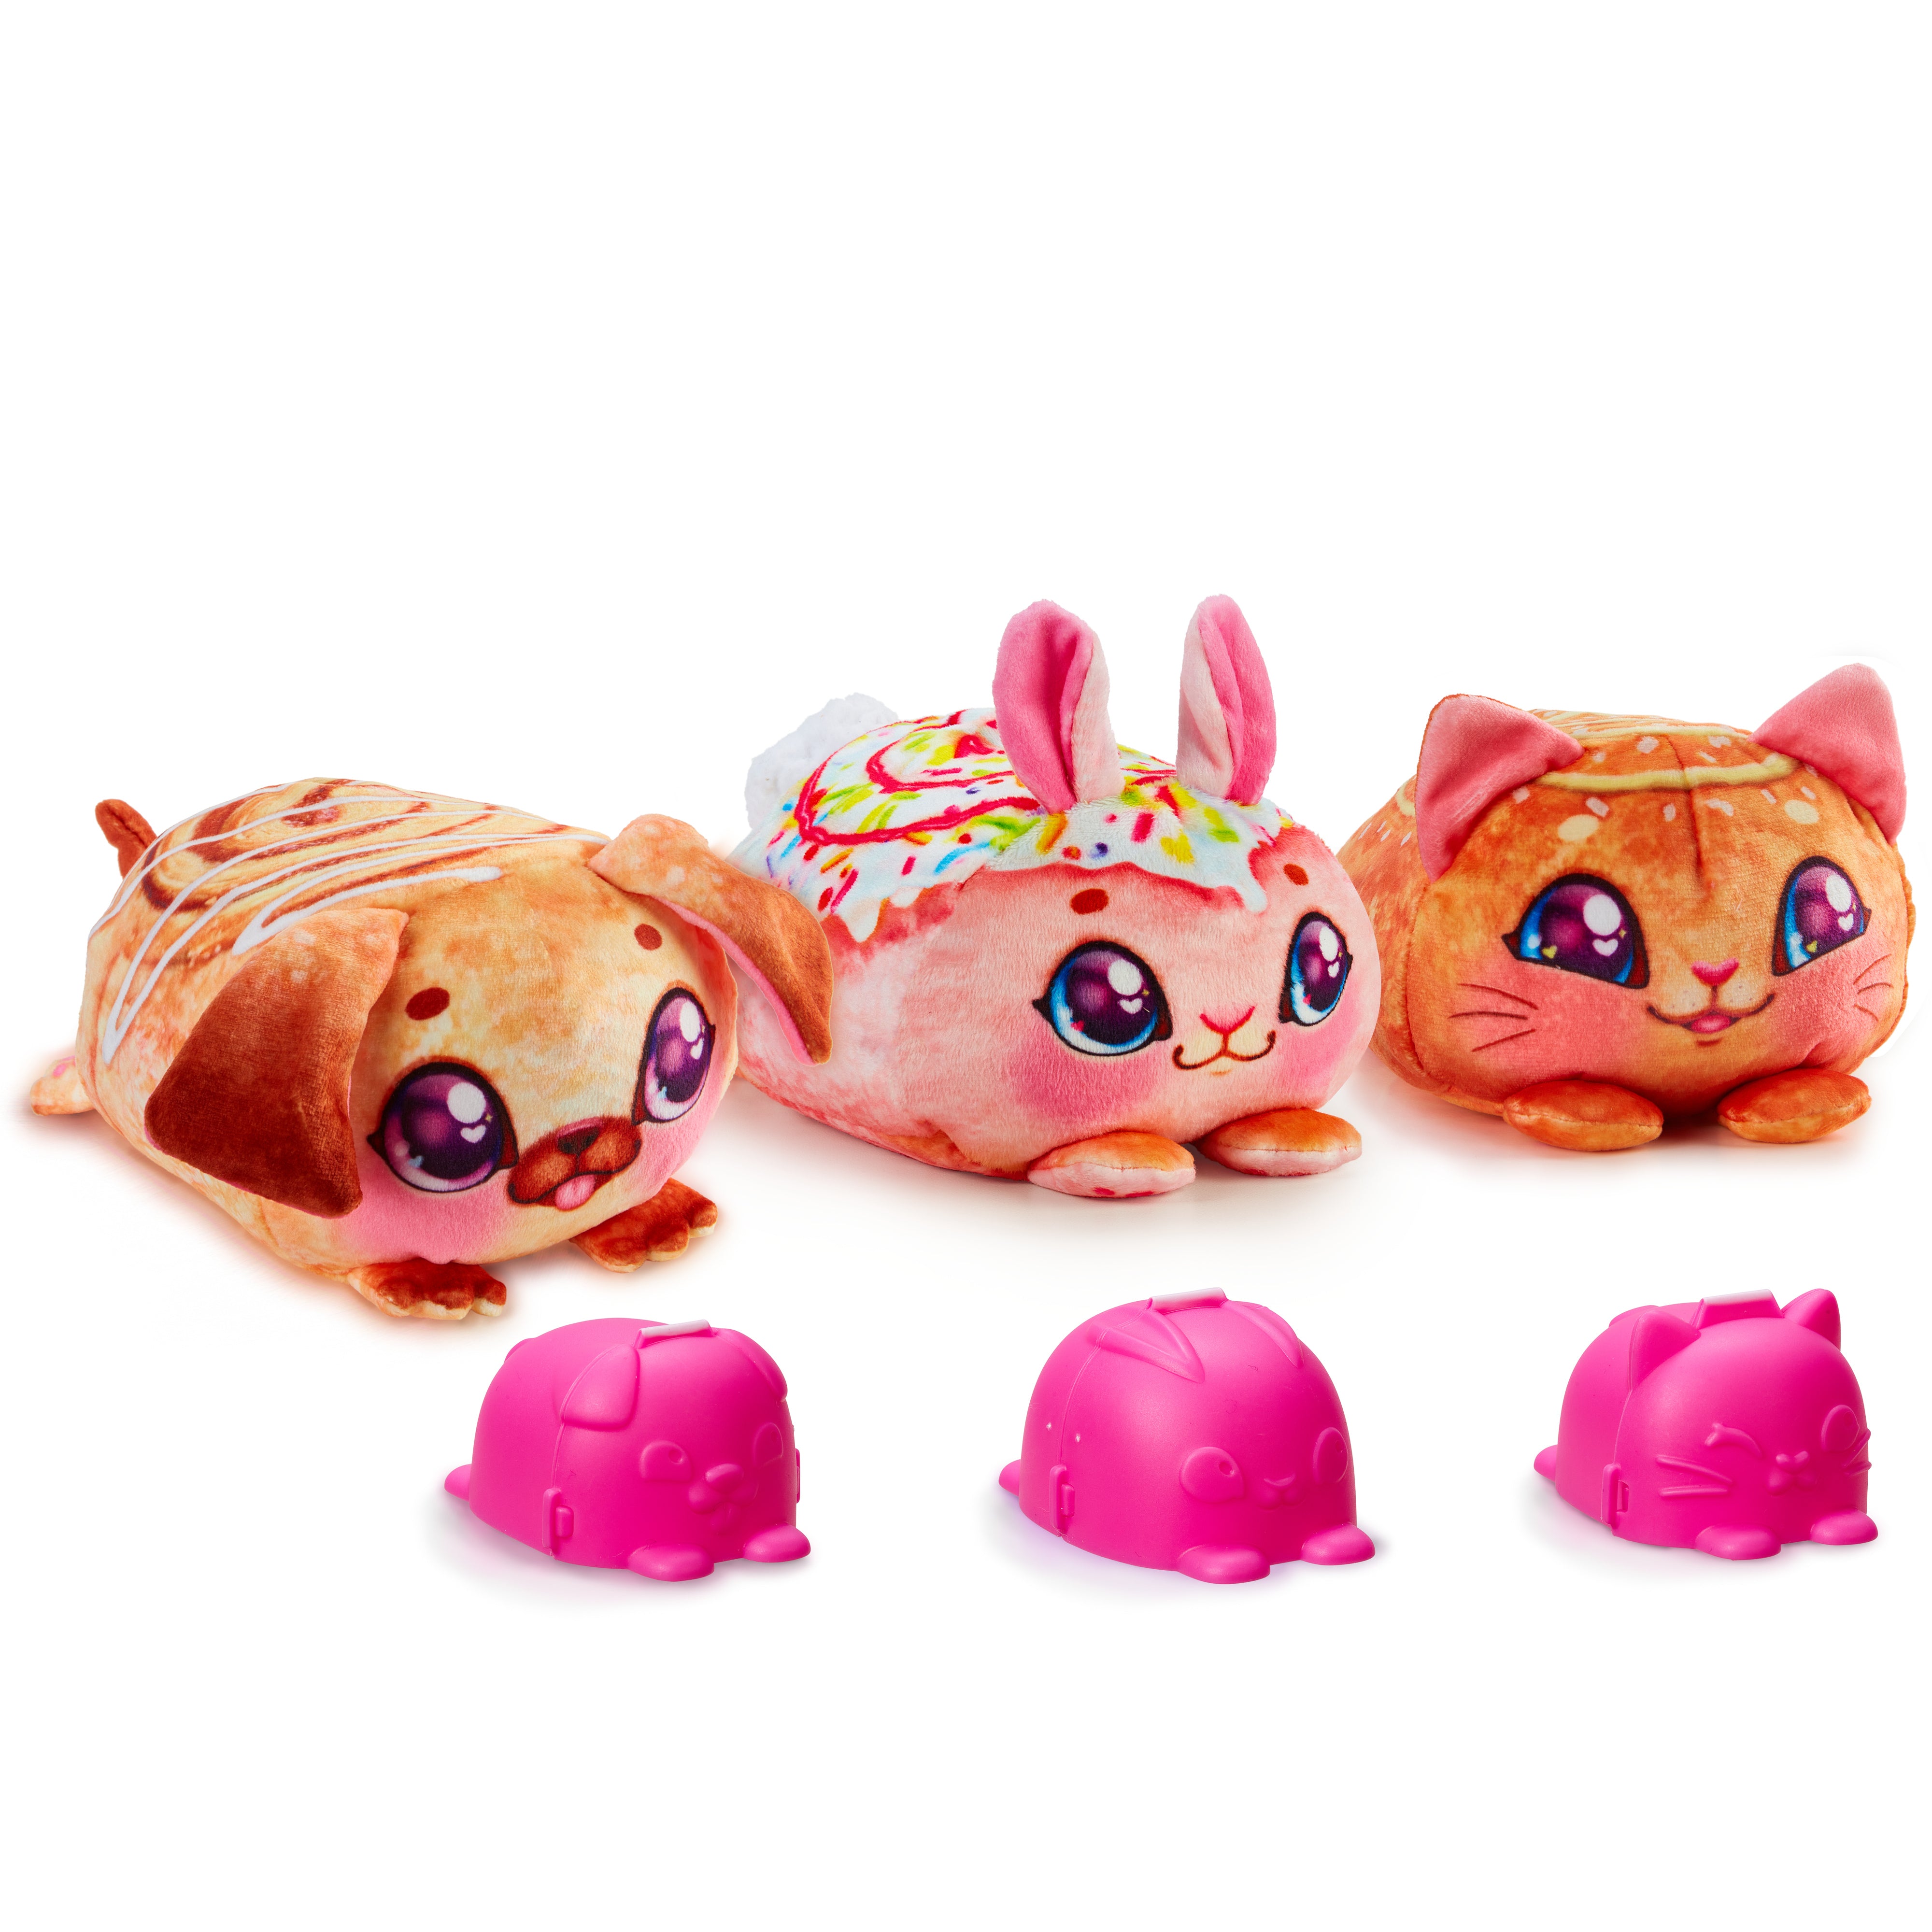 Cookeez Makery Cinnamon Treatz Pink Oven, Scented, Interactive Plush, Styles Vary, Ages 5+ | MTTS163